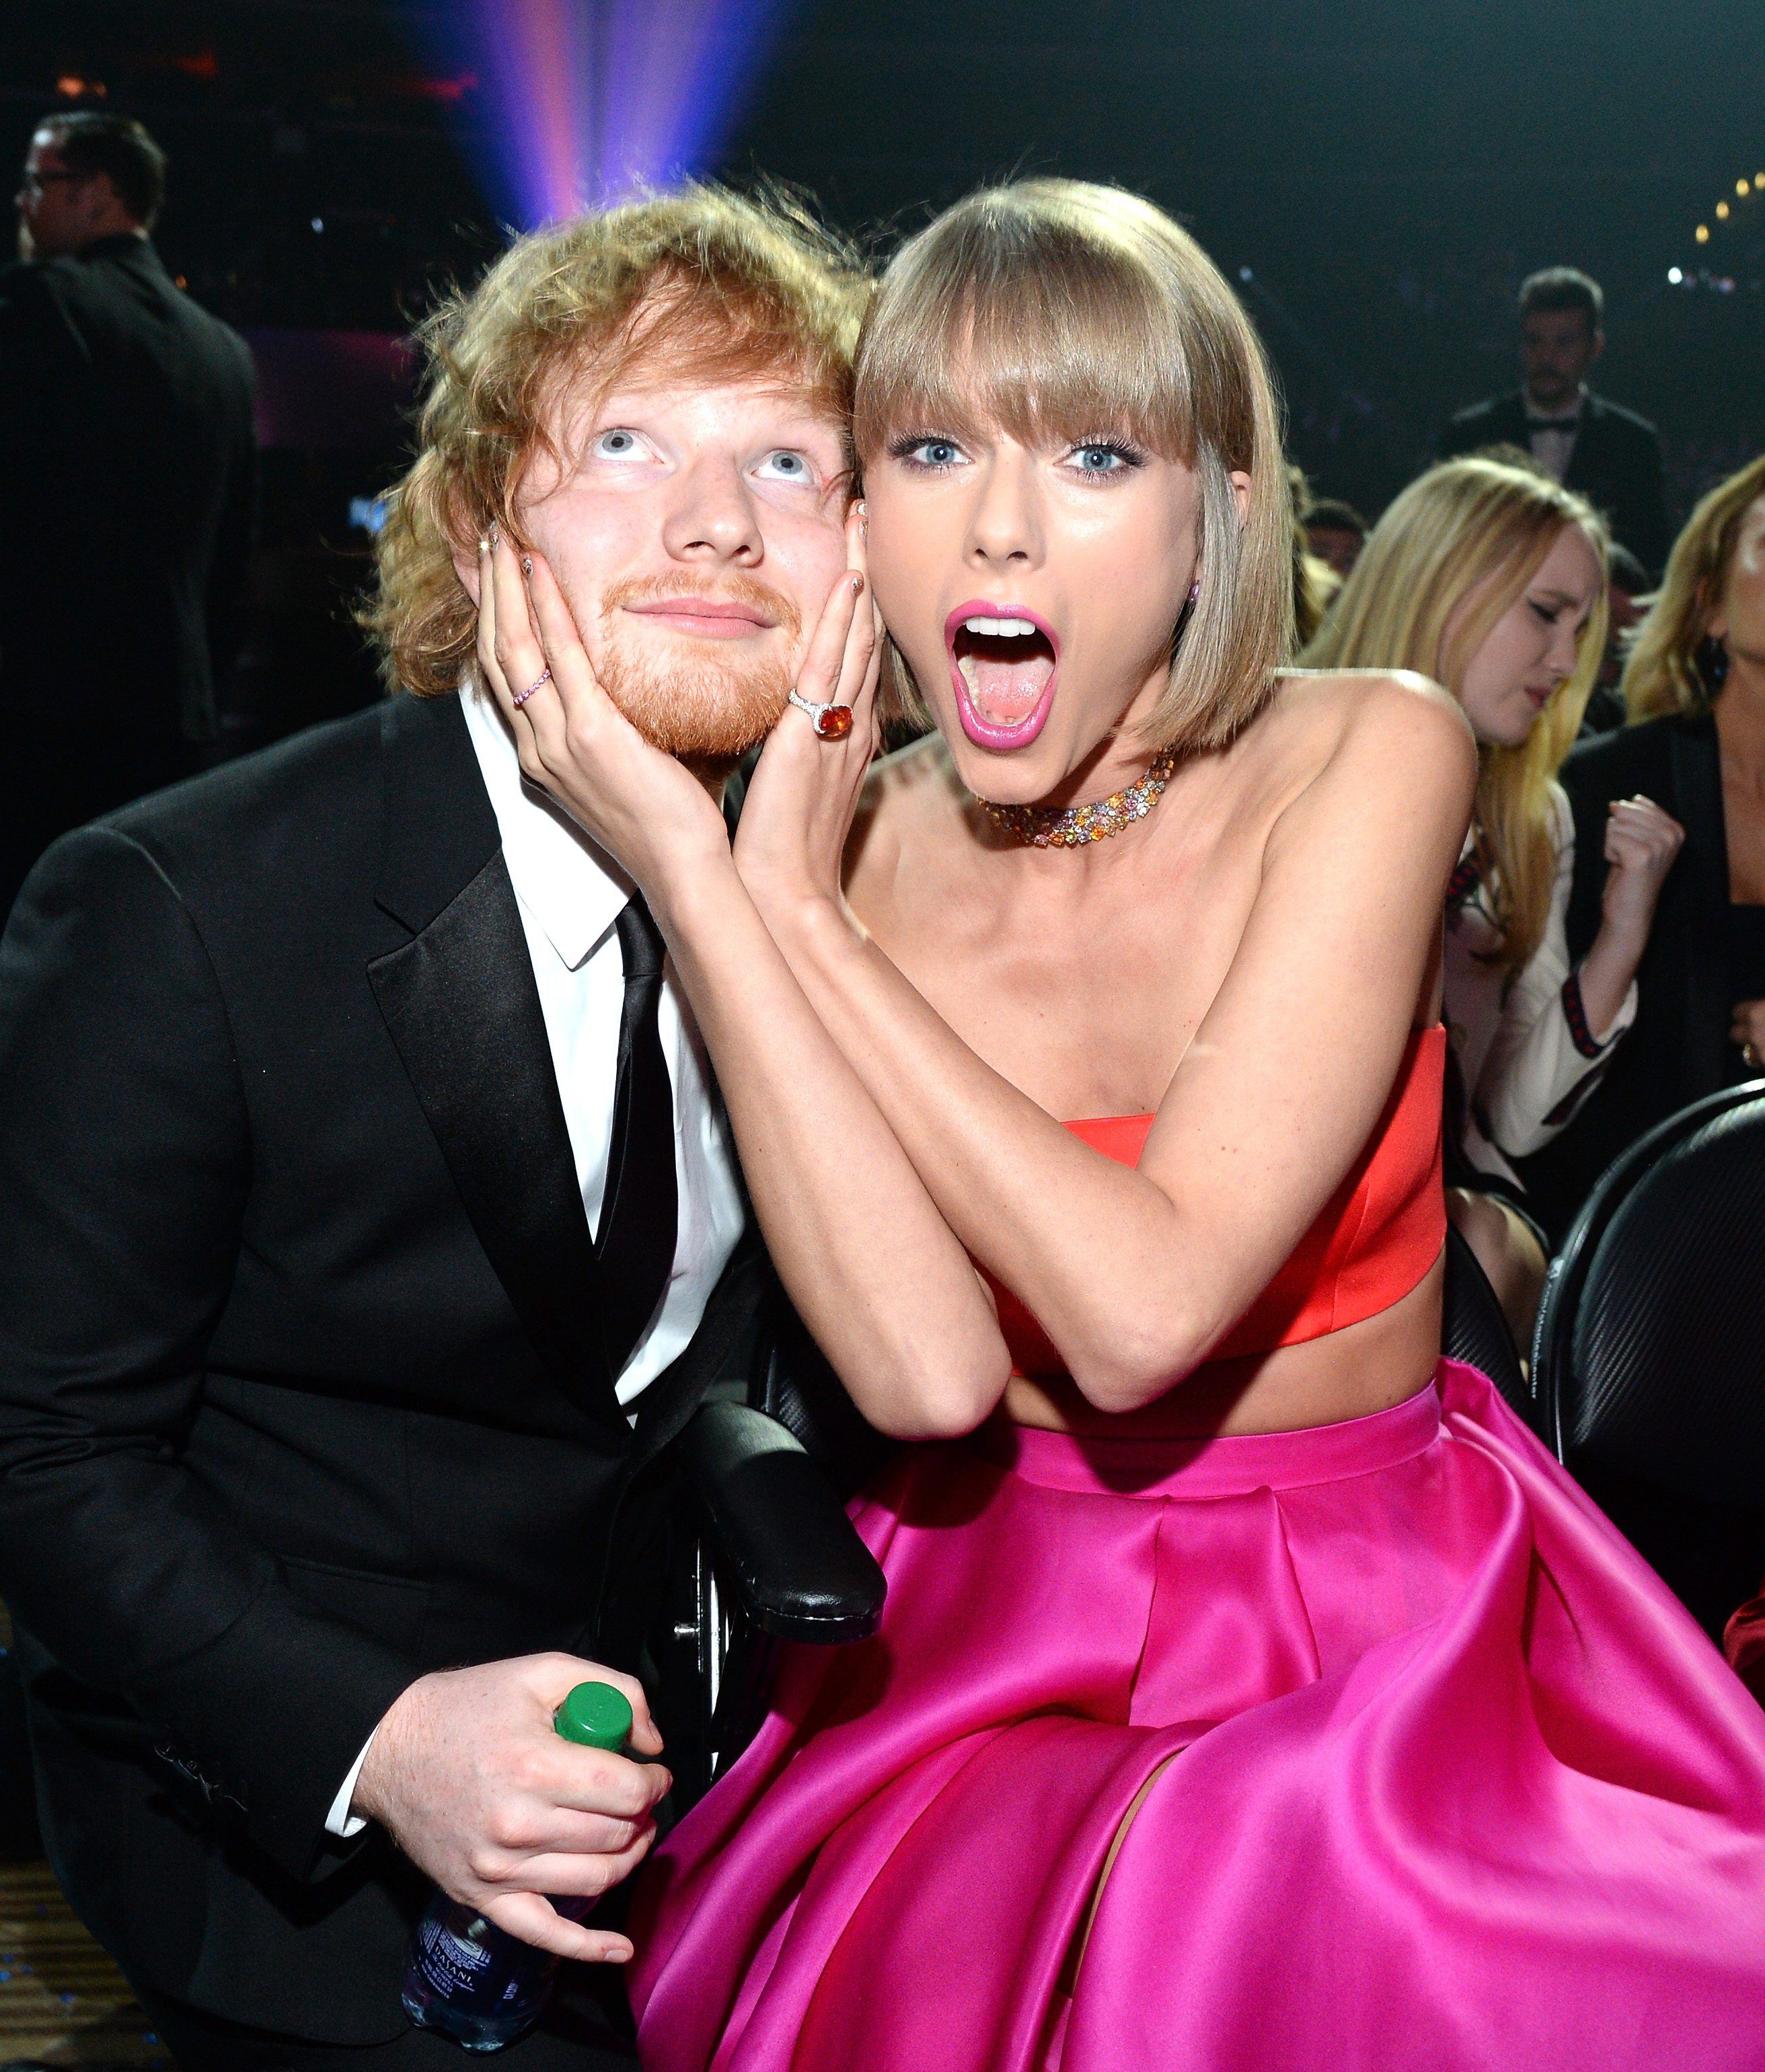 Ed Sheeran and Taylor Swift attends The 58th GRAMMY Awards at Staples Center on February 15, 2016 in Los Angeles, California. (Kevin Mazur&mdash;Getty Images)